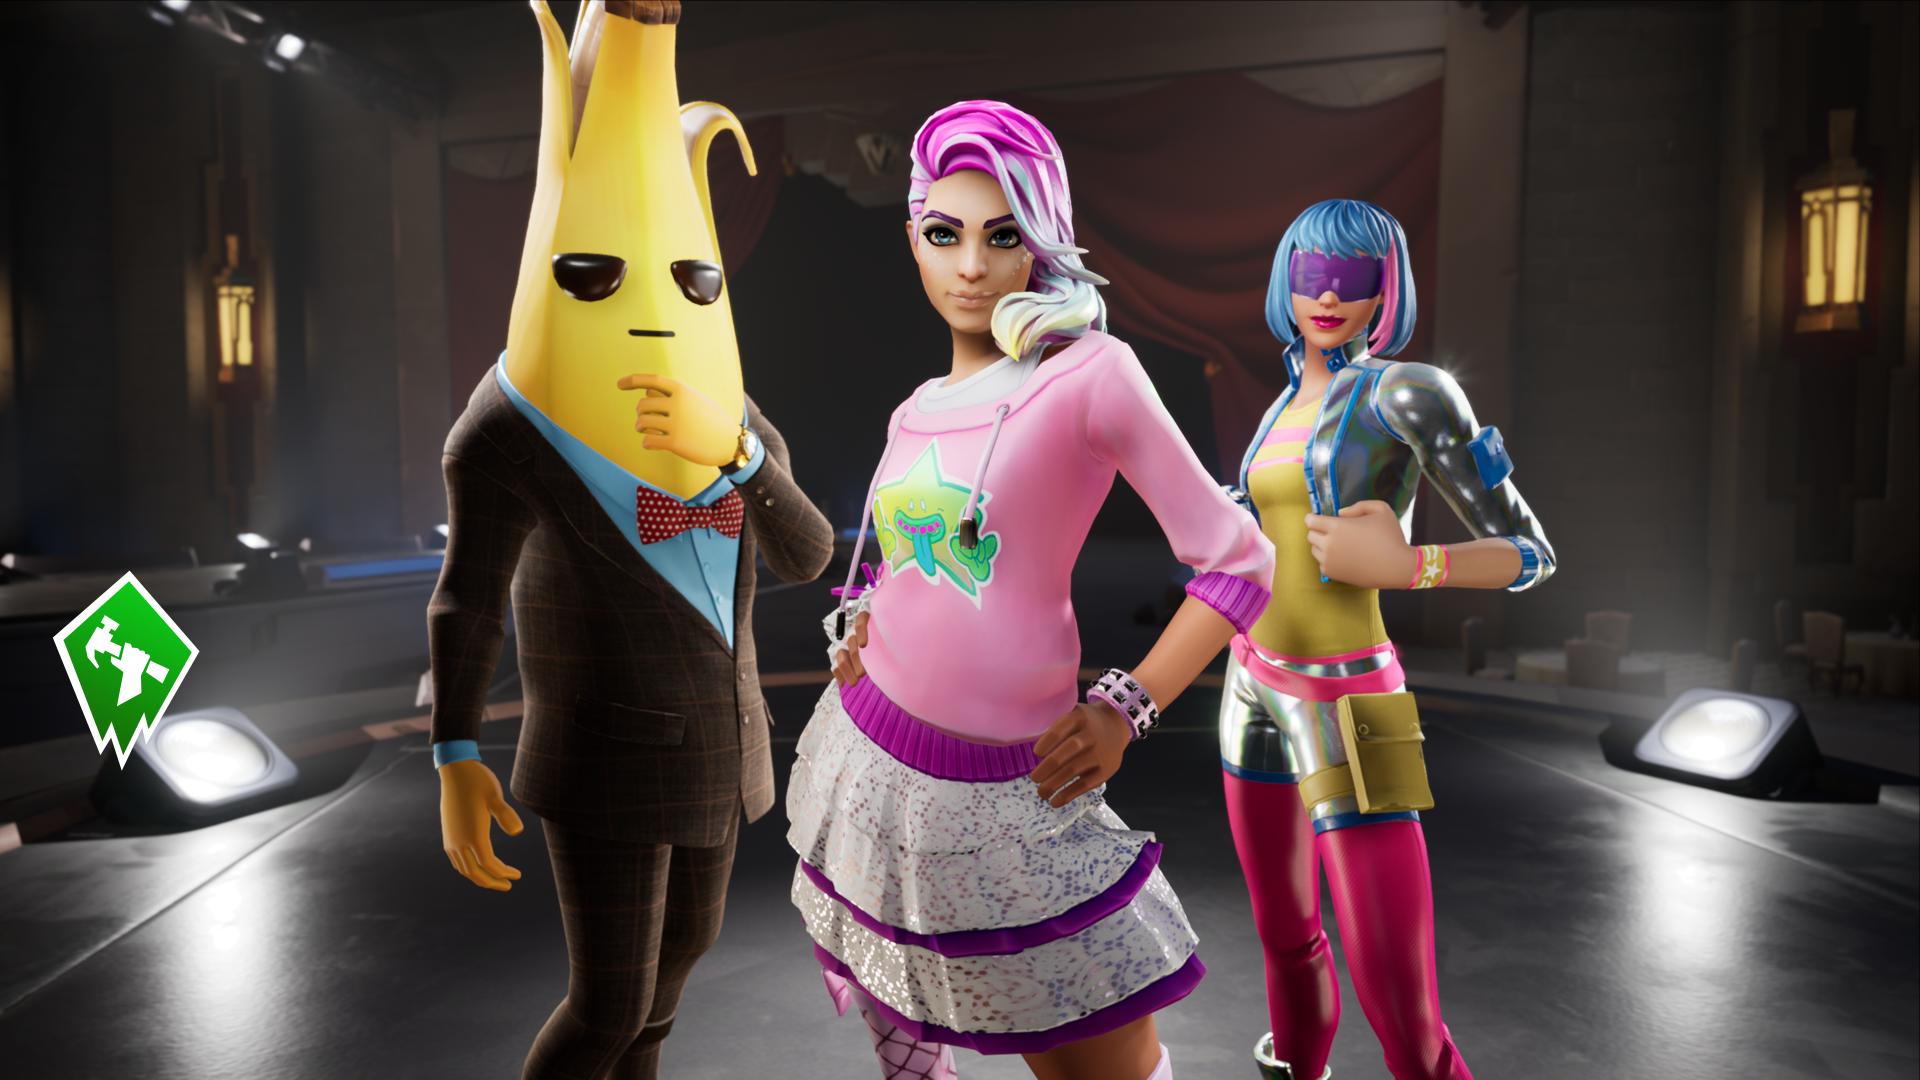 Shimmer Specialist Fortnite Wallpapers